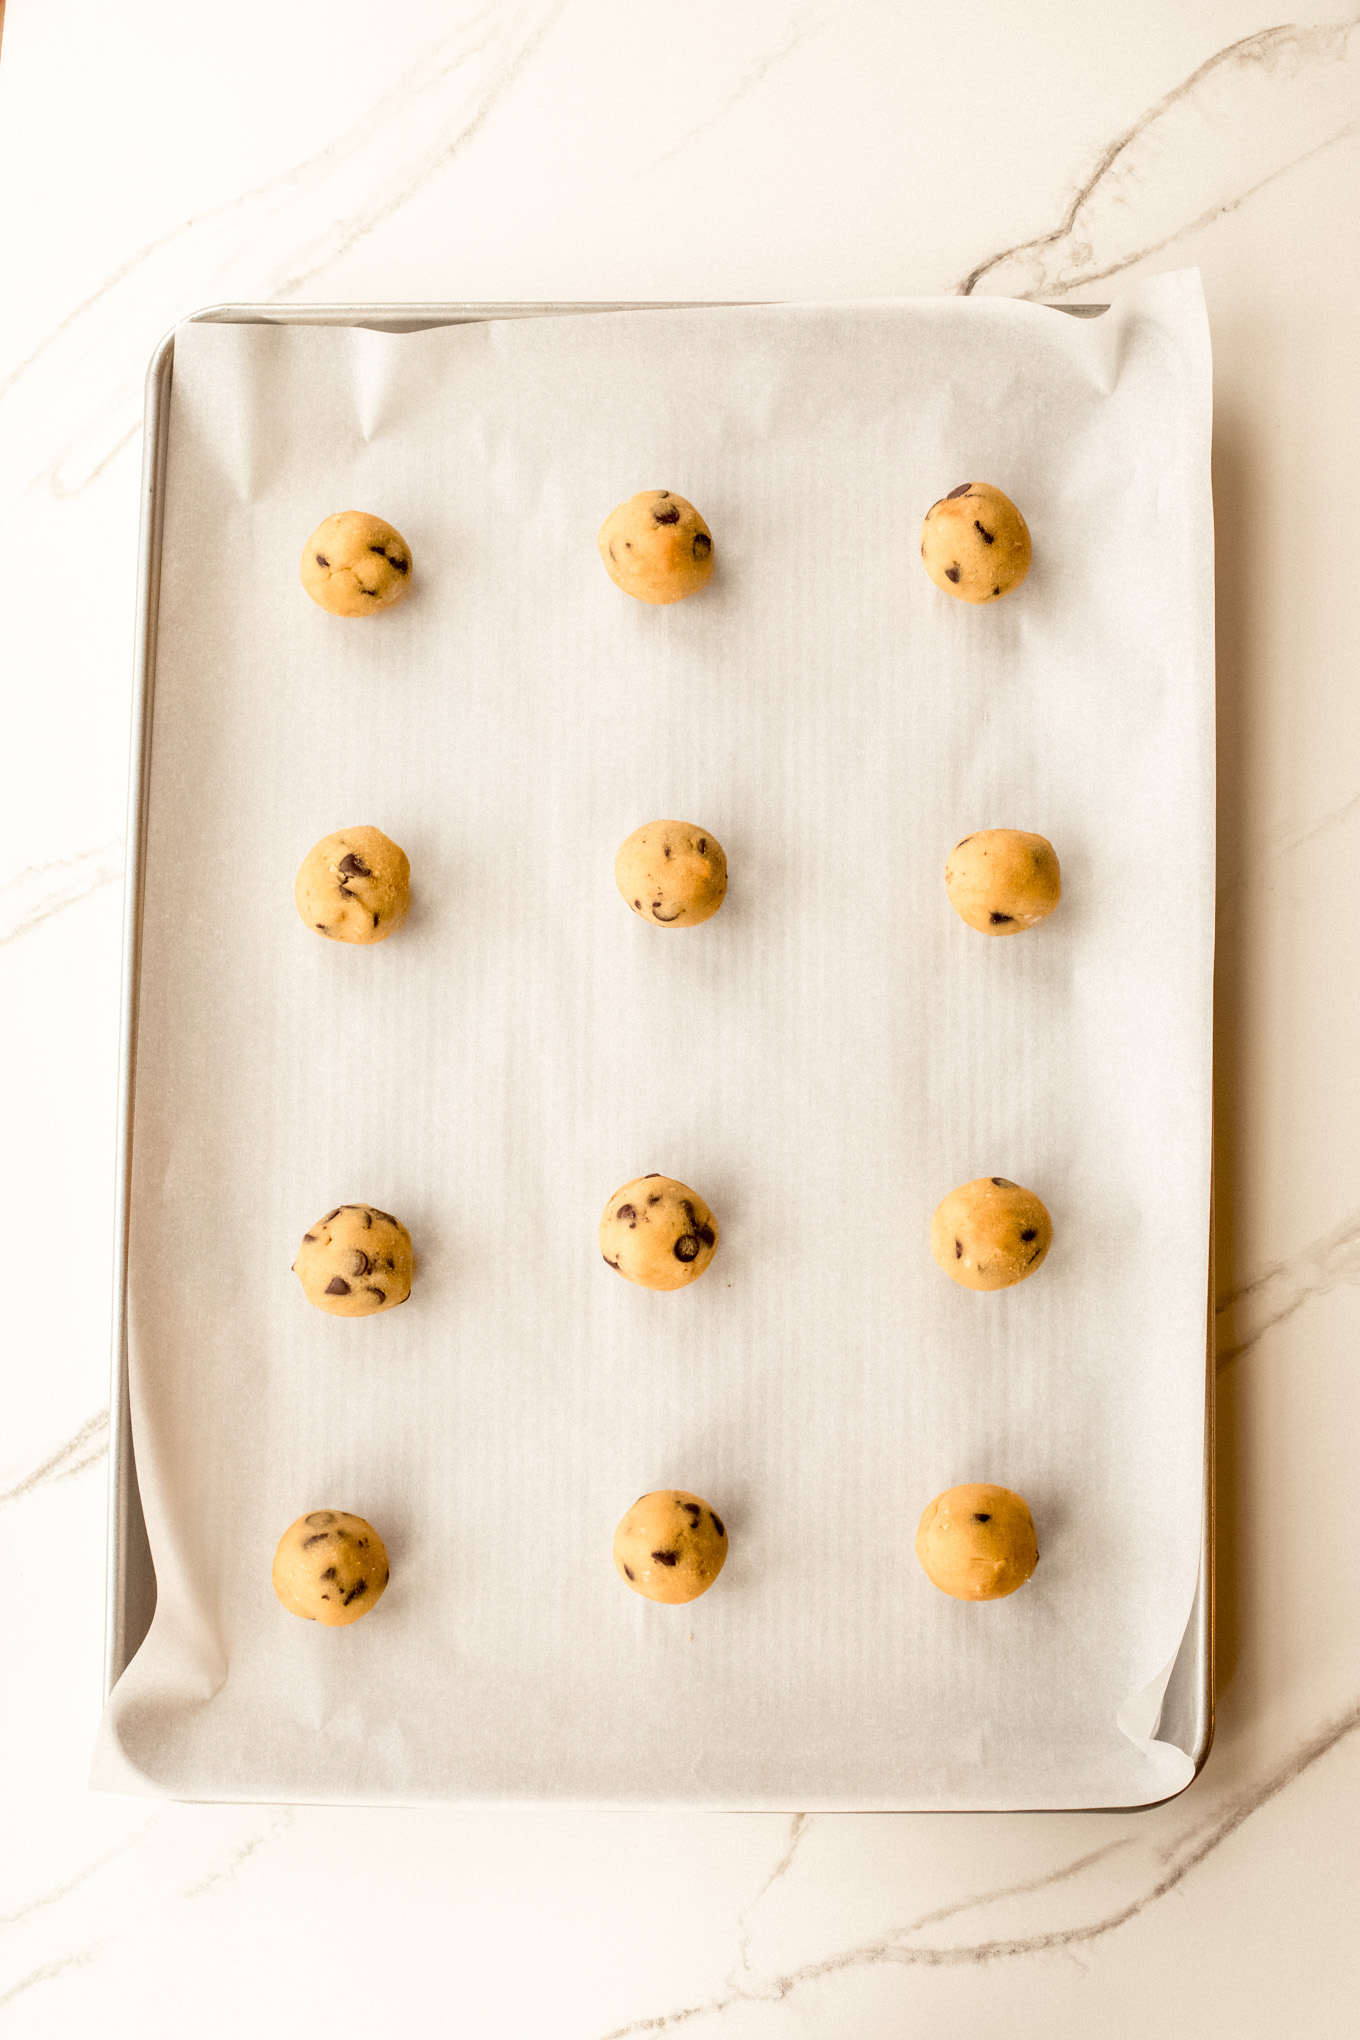 rolled up cookie dough on a baking sheet.